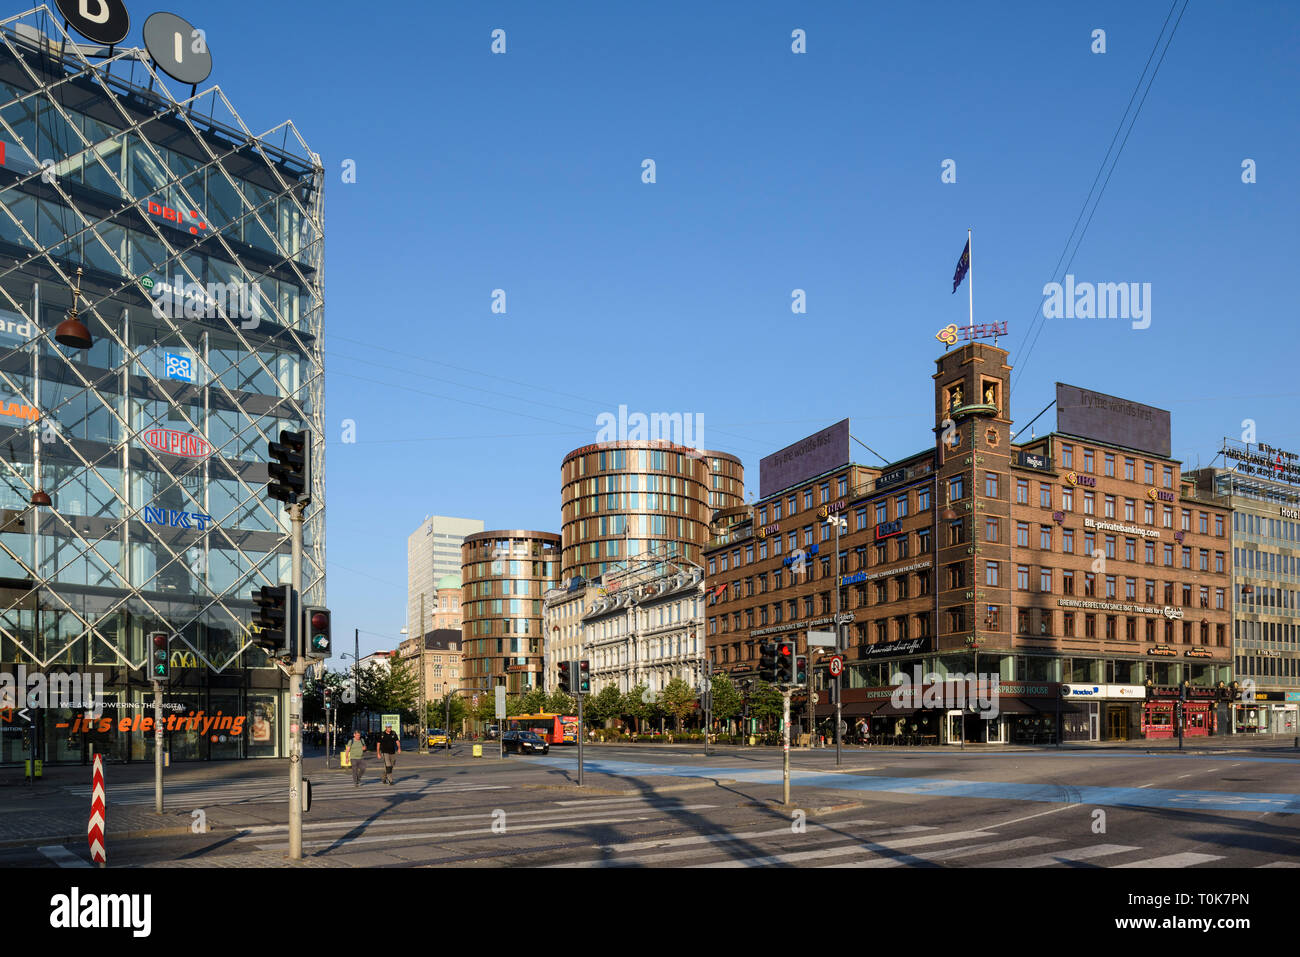 Copenhagen. Denmark. Intersection of Vesterbrogade and H. C. Andersens Blvd. Principal buildings l-r; Industriens Hus, SAS Hotel, Axel Towers, and the Stock Photo